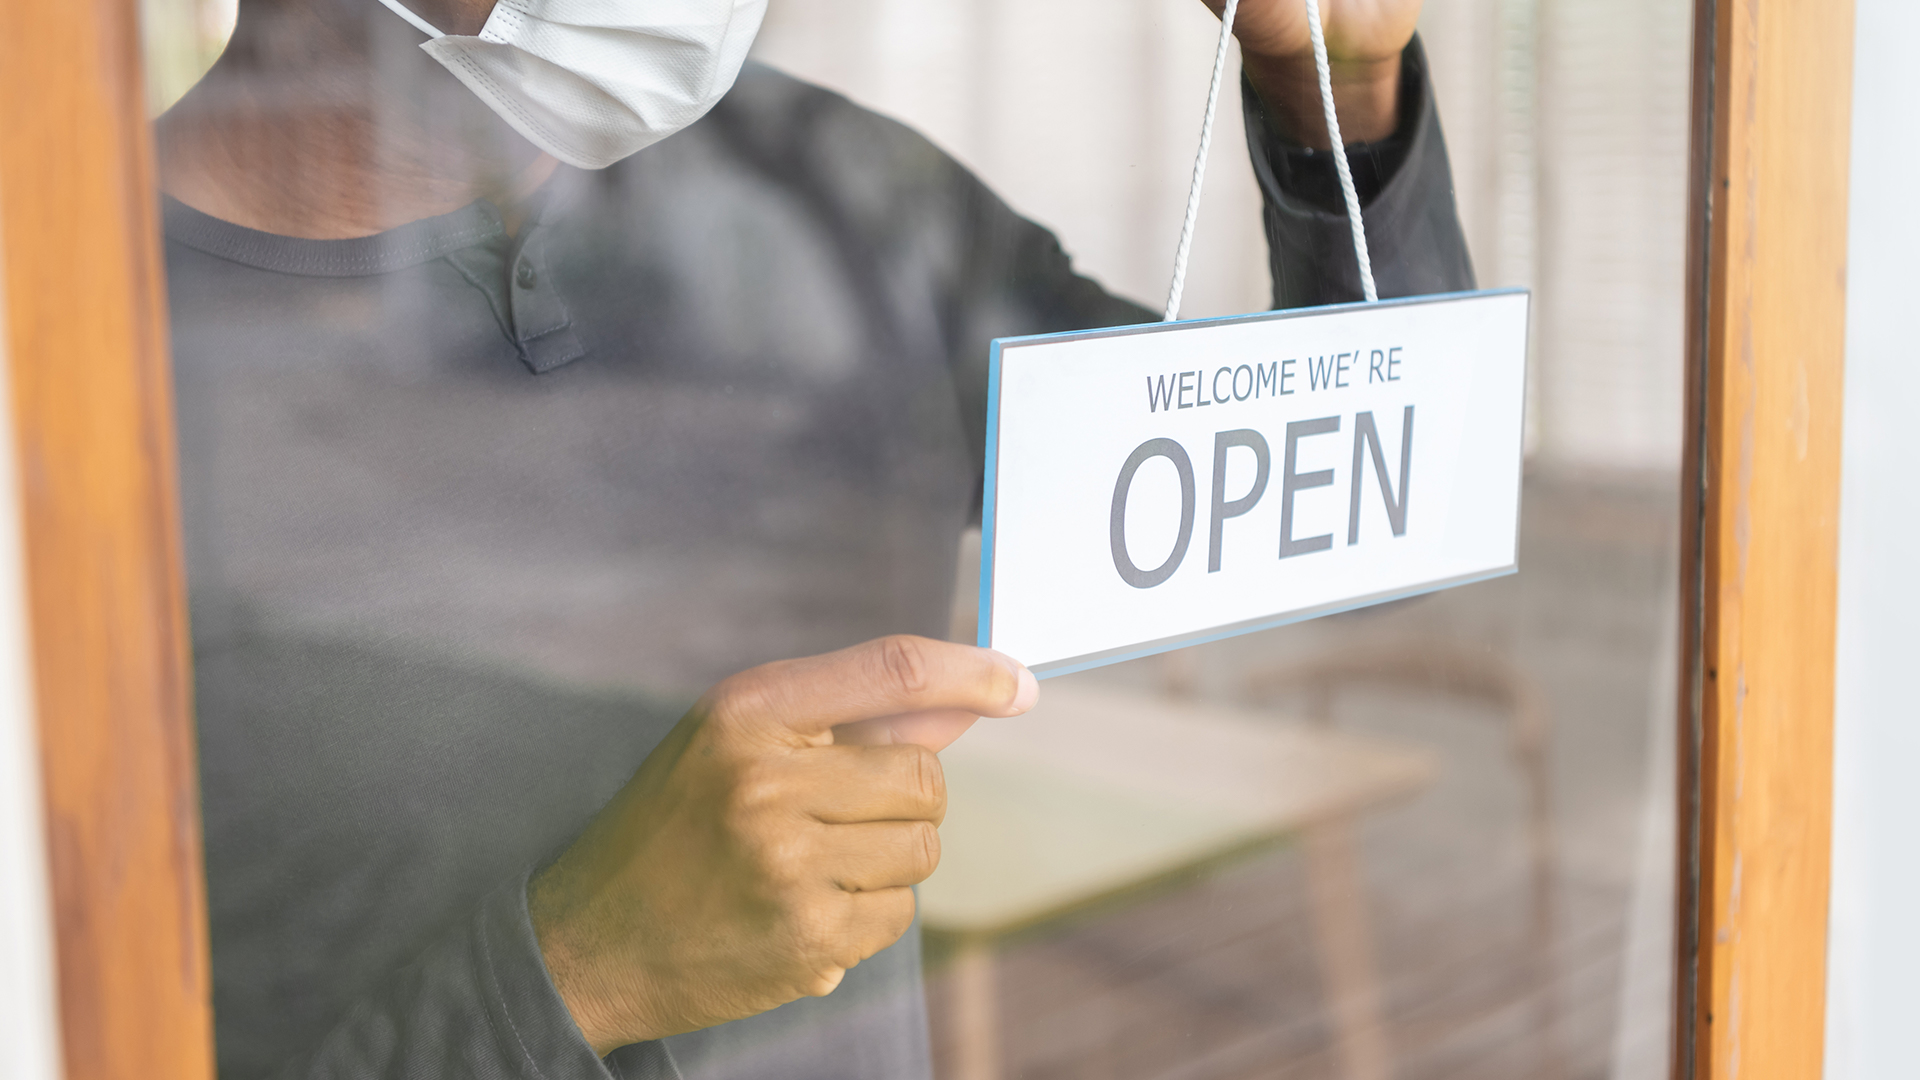 Man hanging up a "Welcome we're open" sign on a glass door